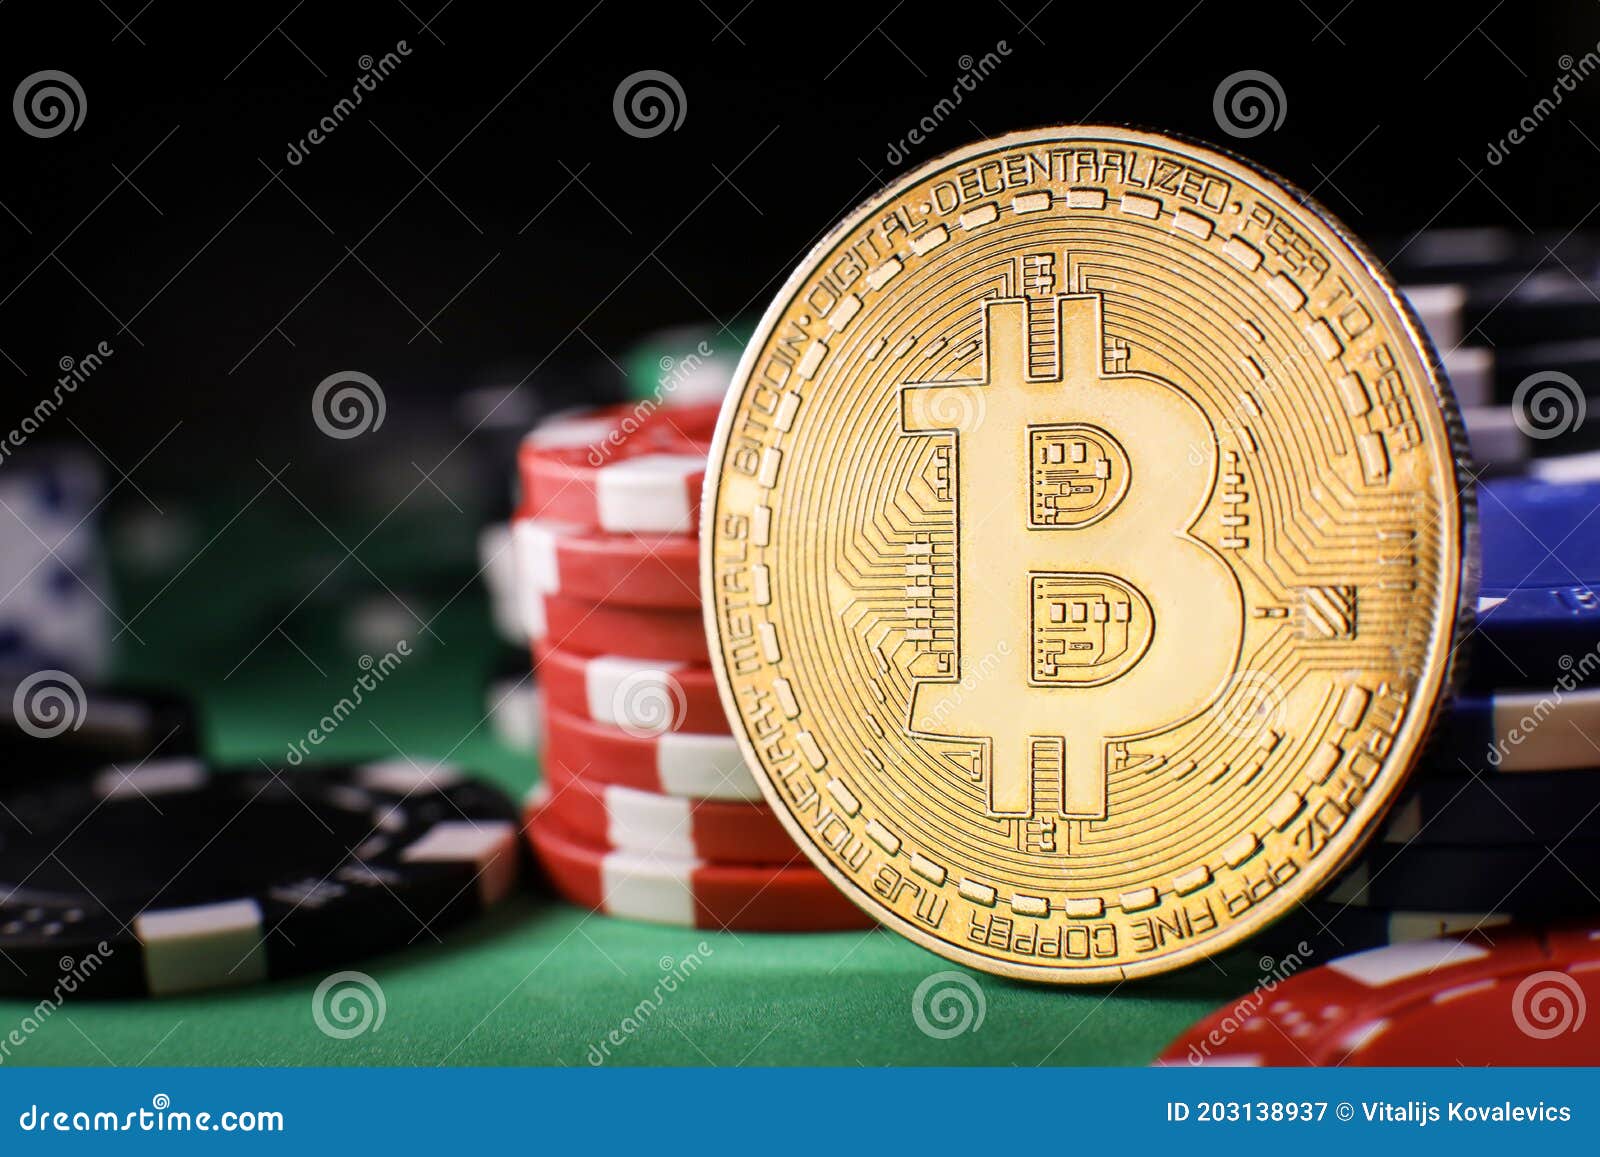 50 Reasons to bitcoin online casino in 2021